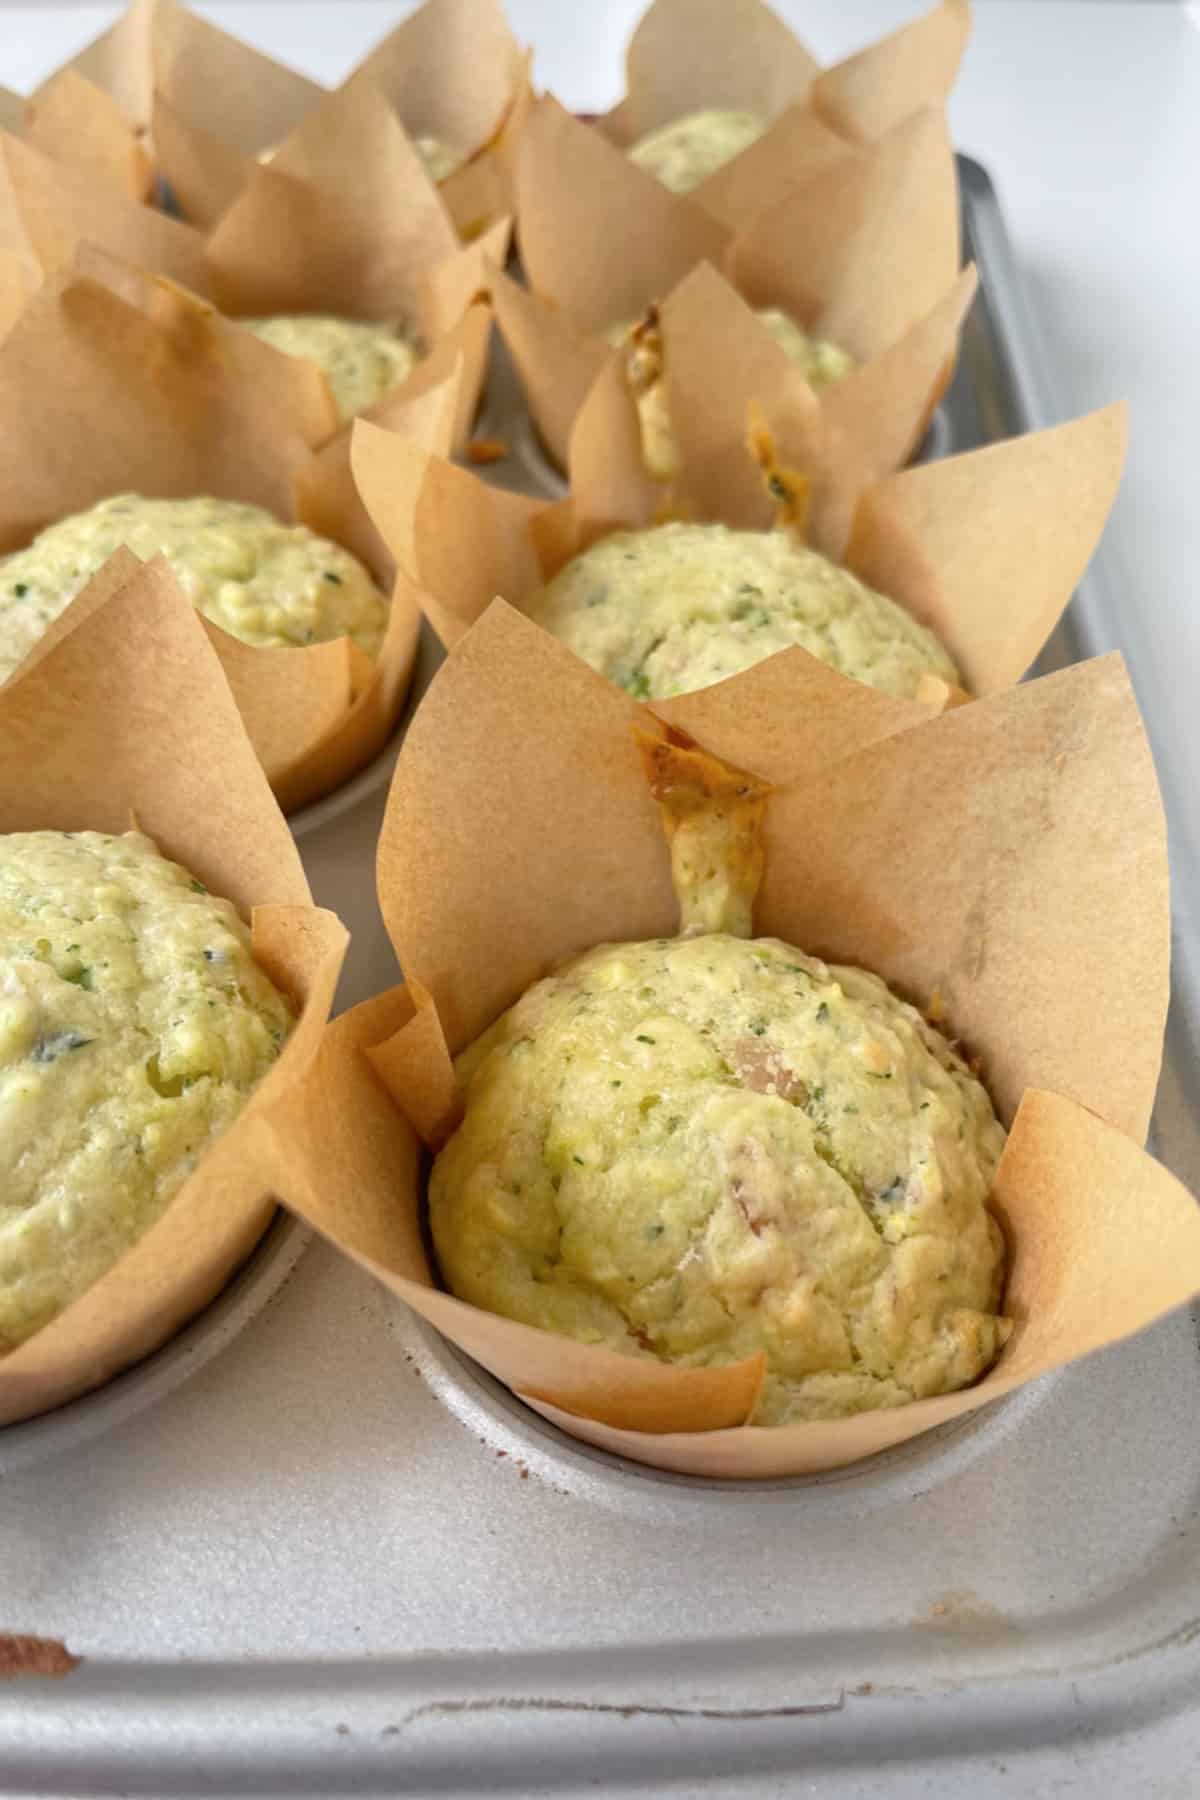 Savoury Muffins straight from the oven in a silver muffin tray.